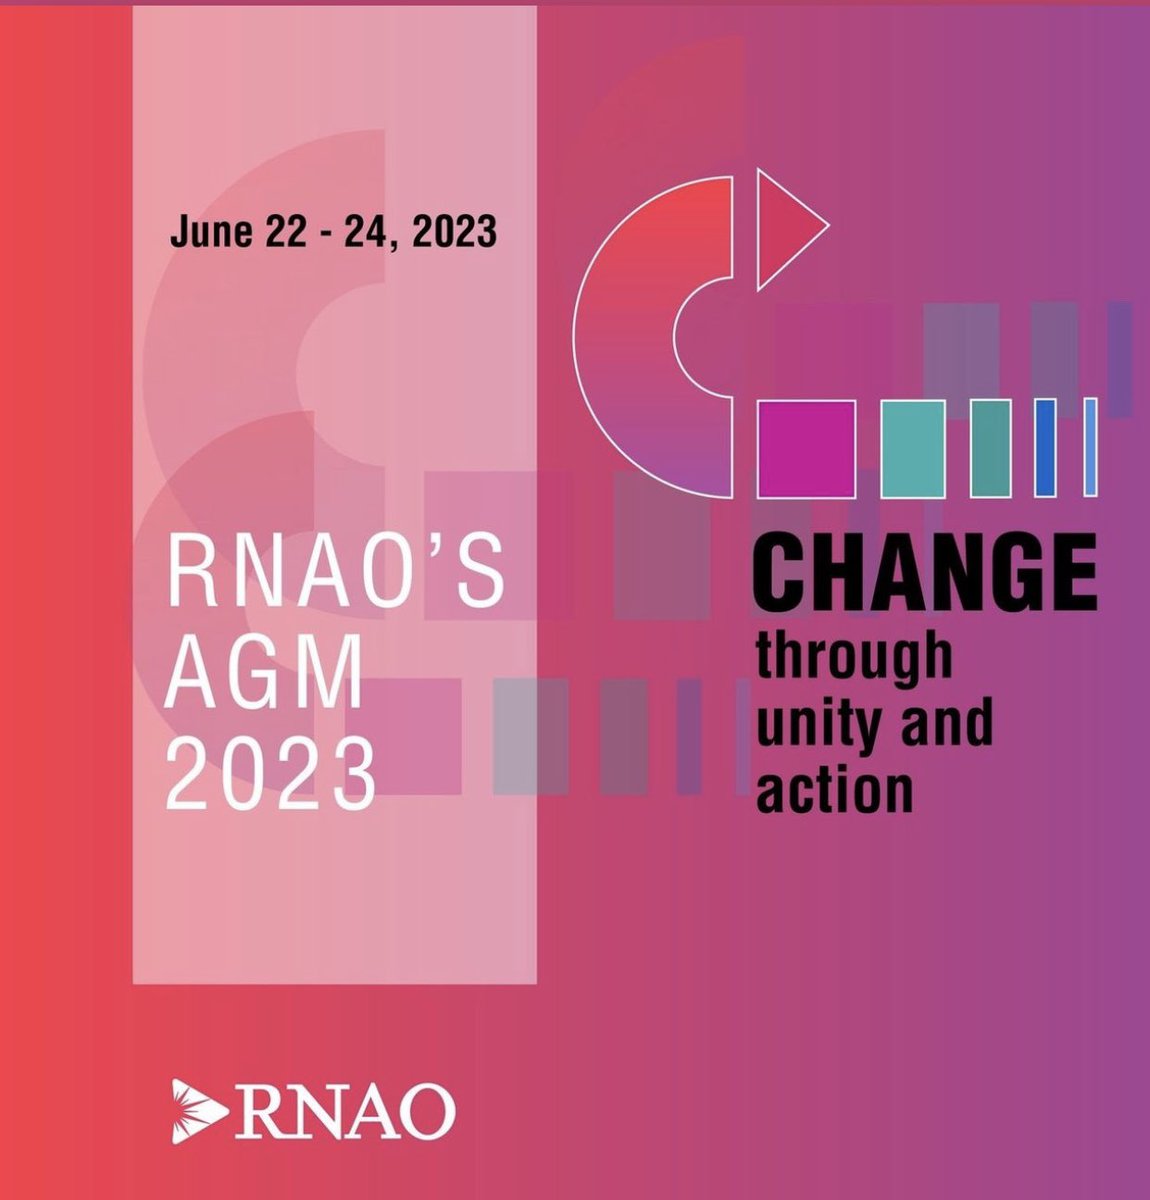 RNAO’s AGM is this Friday!! 
HELD IN PERSON for the first time since 2019! 

The theme for this years AGM is Change through Unity and Action. Register here: 

myrnao.ca/civicrm/event/…..

#registerednurse #ontarionurses #pediatricnurse #continuededucation #professionalpractice